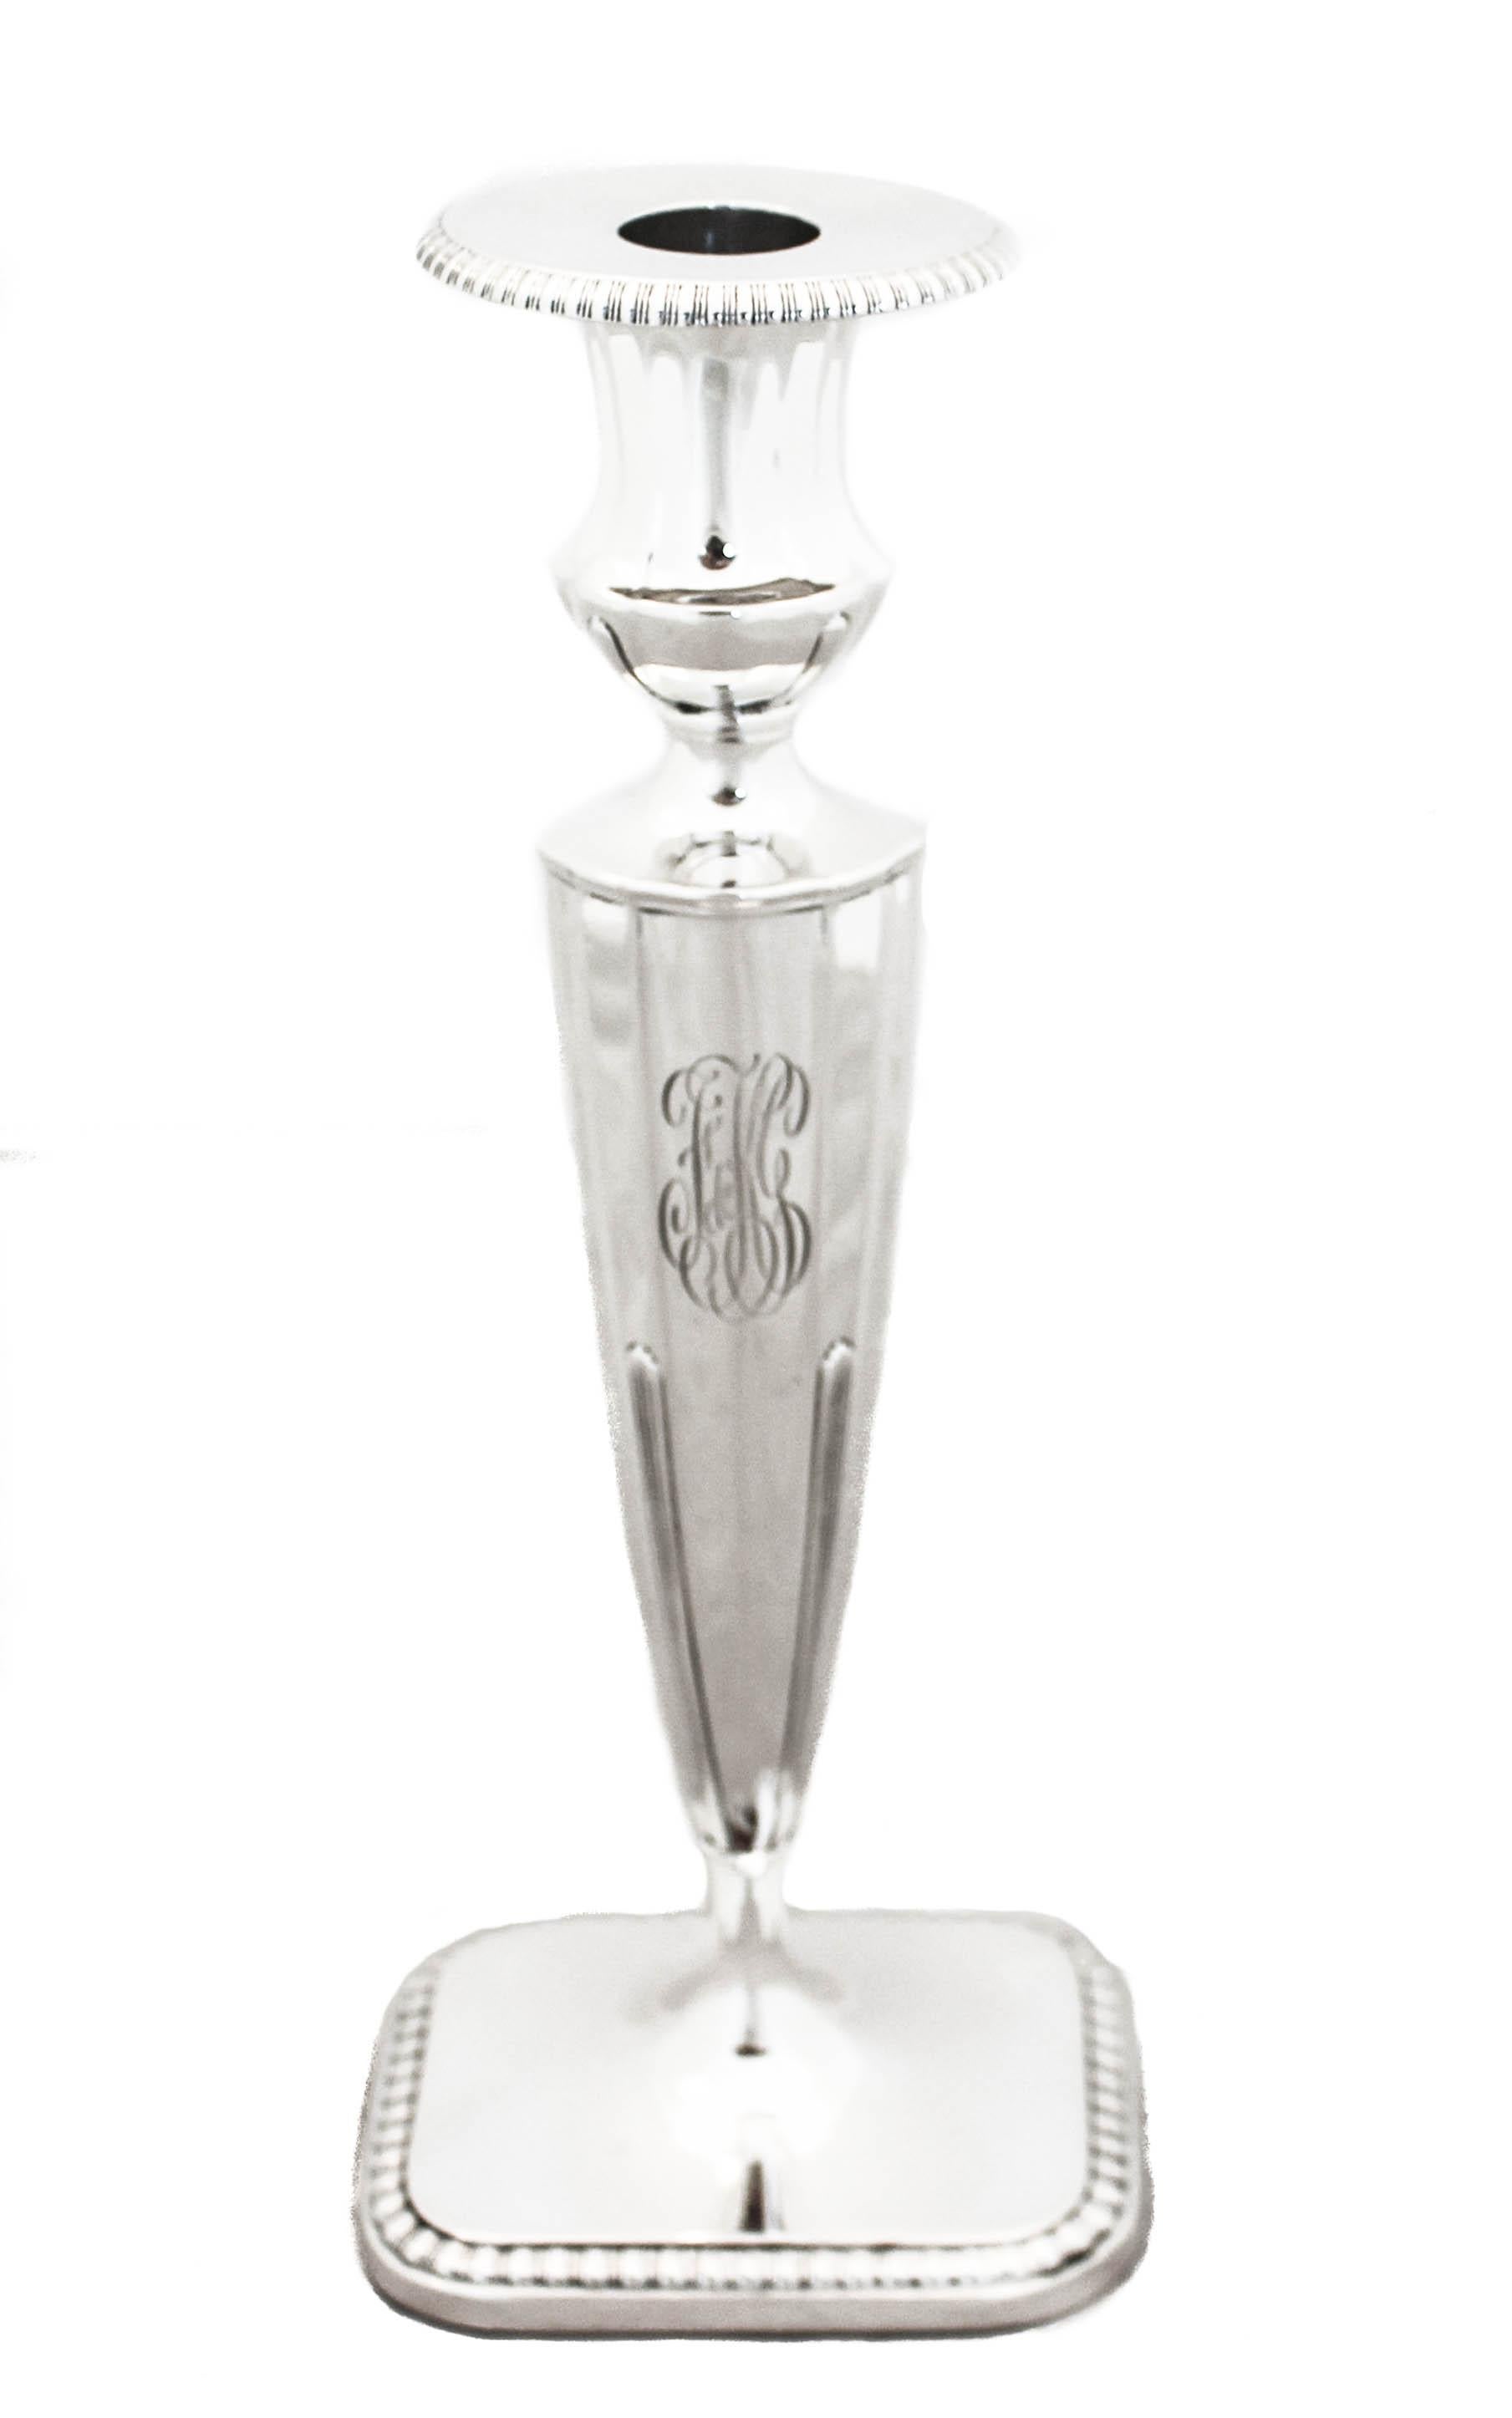 We are happy to offer you this pair of sterling silver Art Deco candlesticks by Reed and Barton. They are simply gorgeous! The base is oblong with a gadroon design around the edge and the same pattern is found around the bobeche. The body is tapered